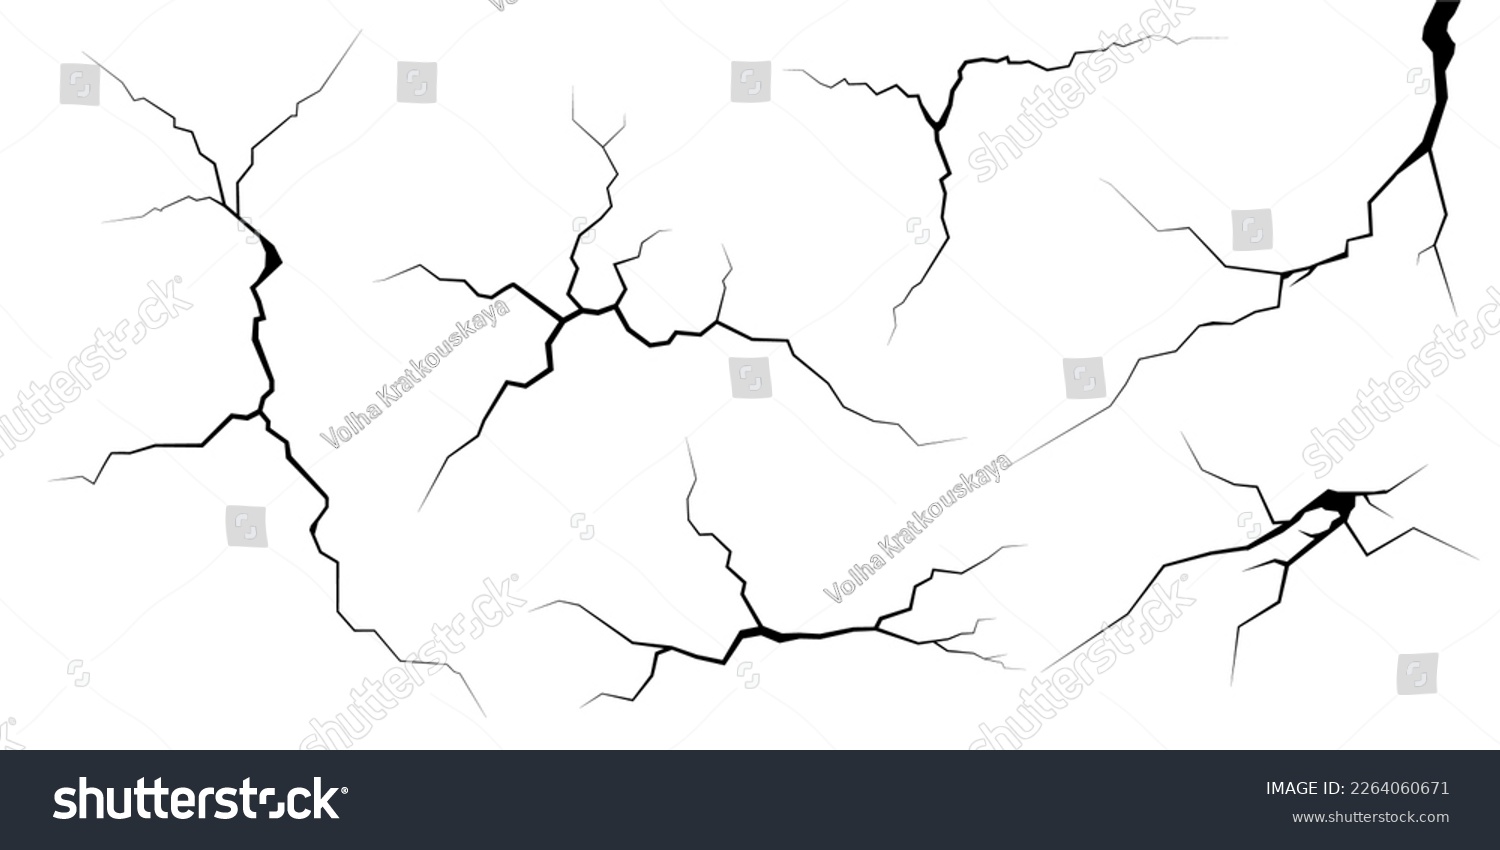 SVG of Surface cracks and fissures in ground, concrete, crevices from disaster top view. Breaks on land surface from earthquake isolated on white background. Broken ground, wall, glass pattern effect. Damage svg